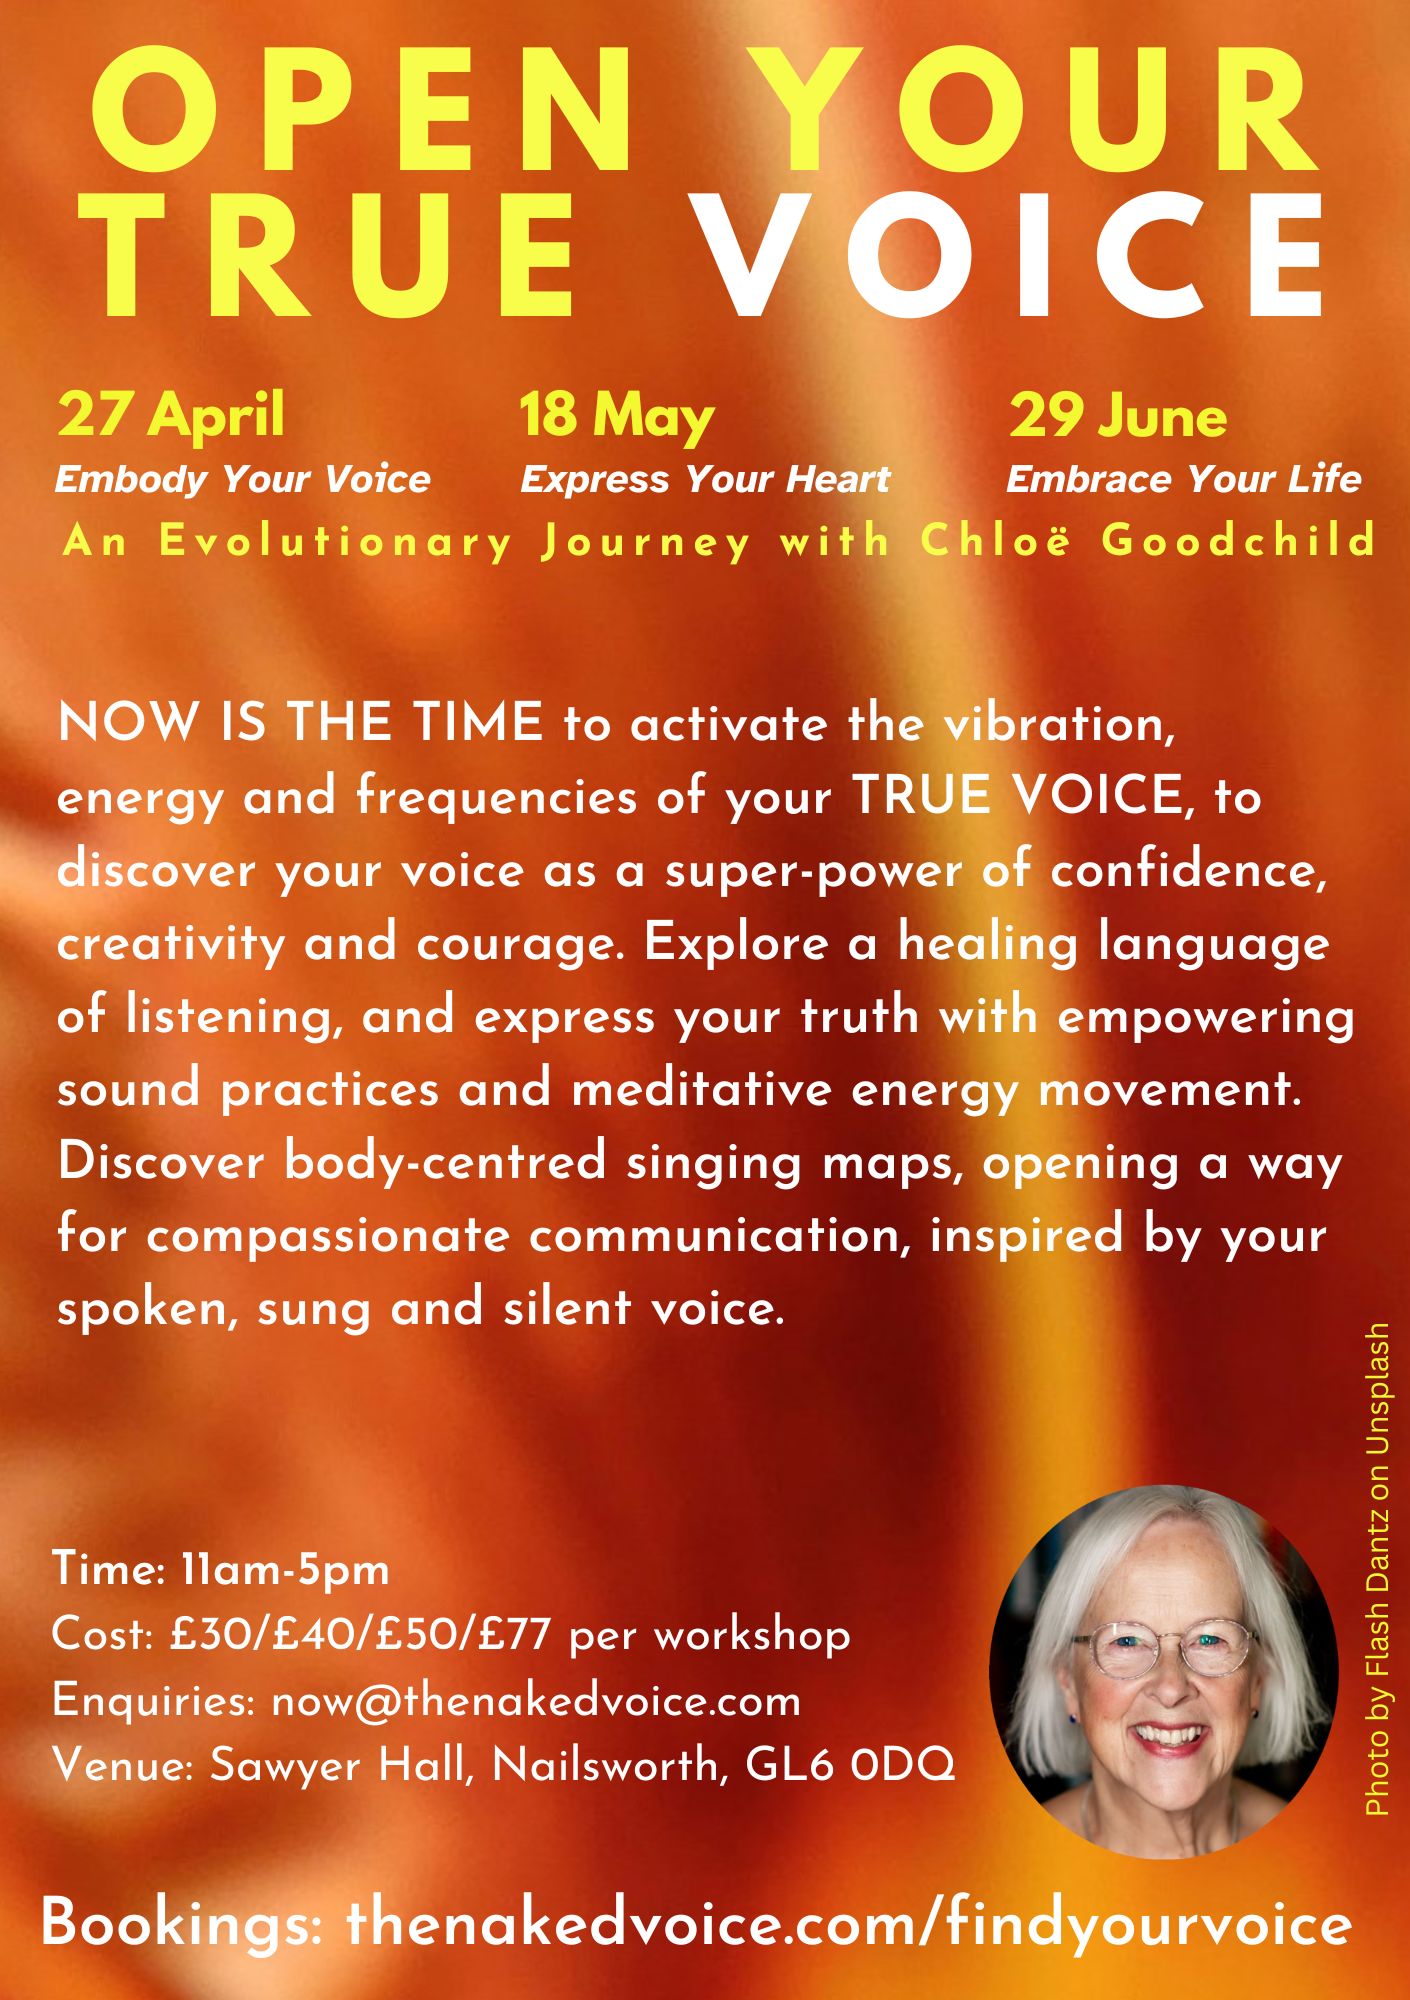 GLOUCESTERSHIRE - OPEN YOUR TRUE VOICE: EXPRESS YOUR HEART